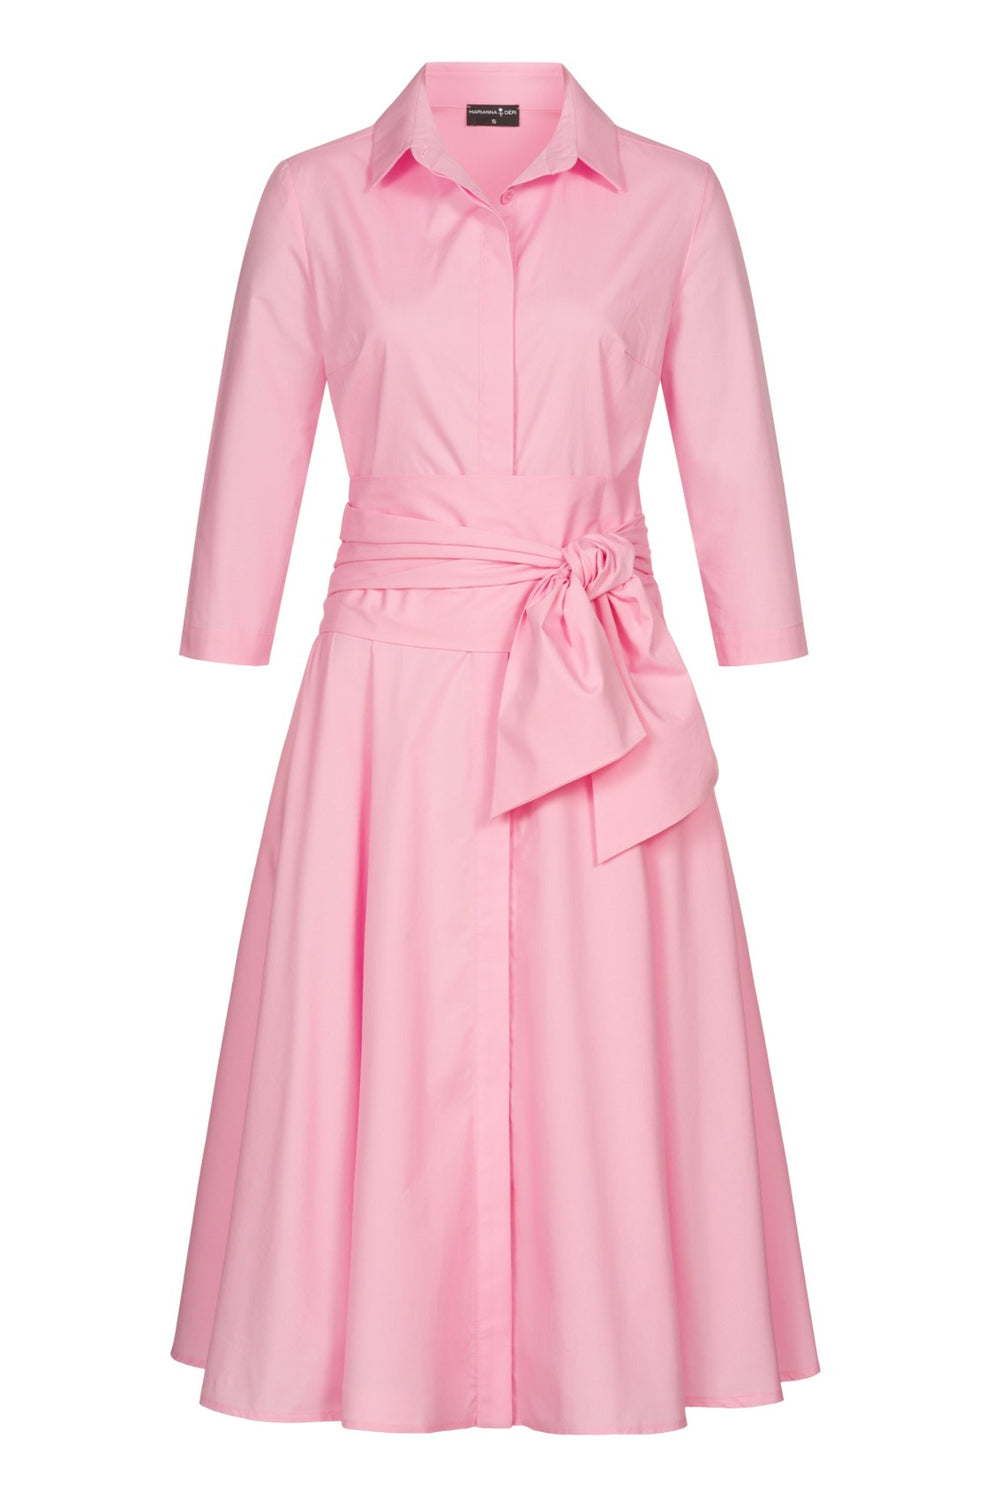 MARIANNA DÉRI | pink Shirt dress in midi length with tie belt